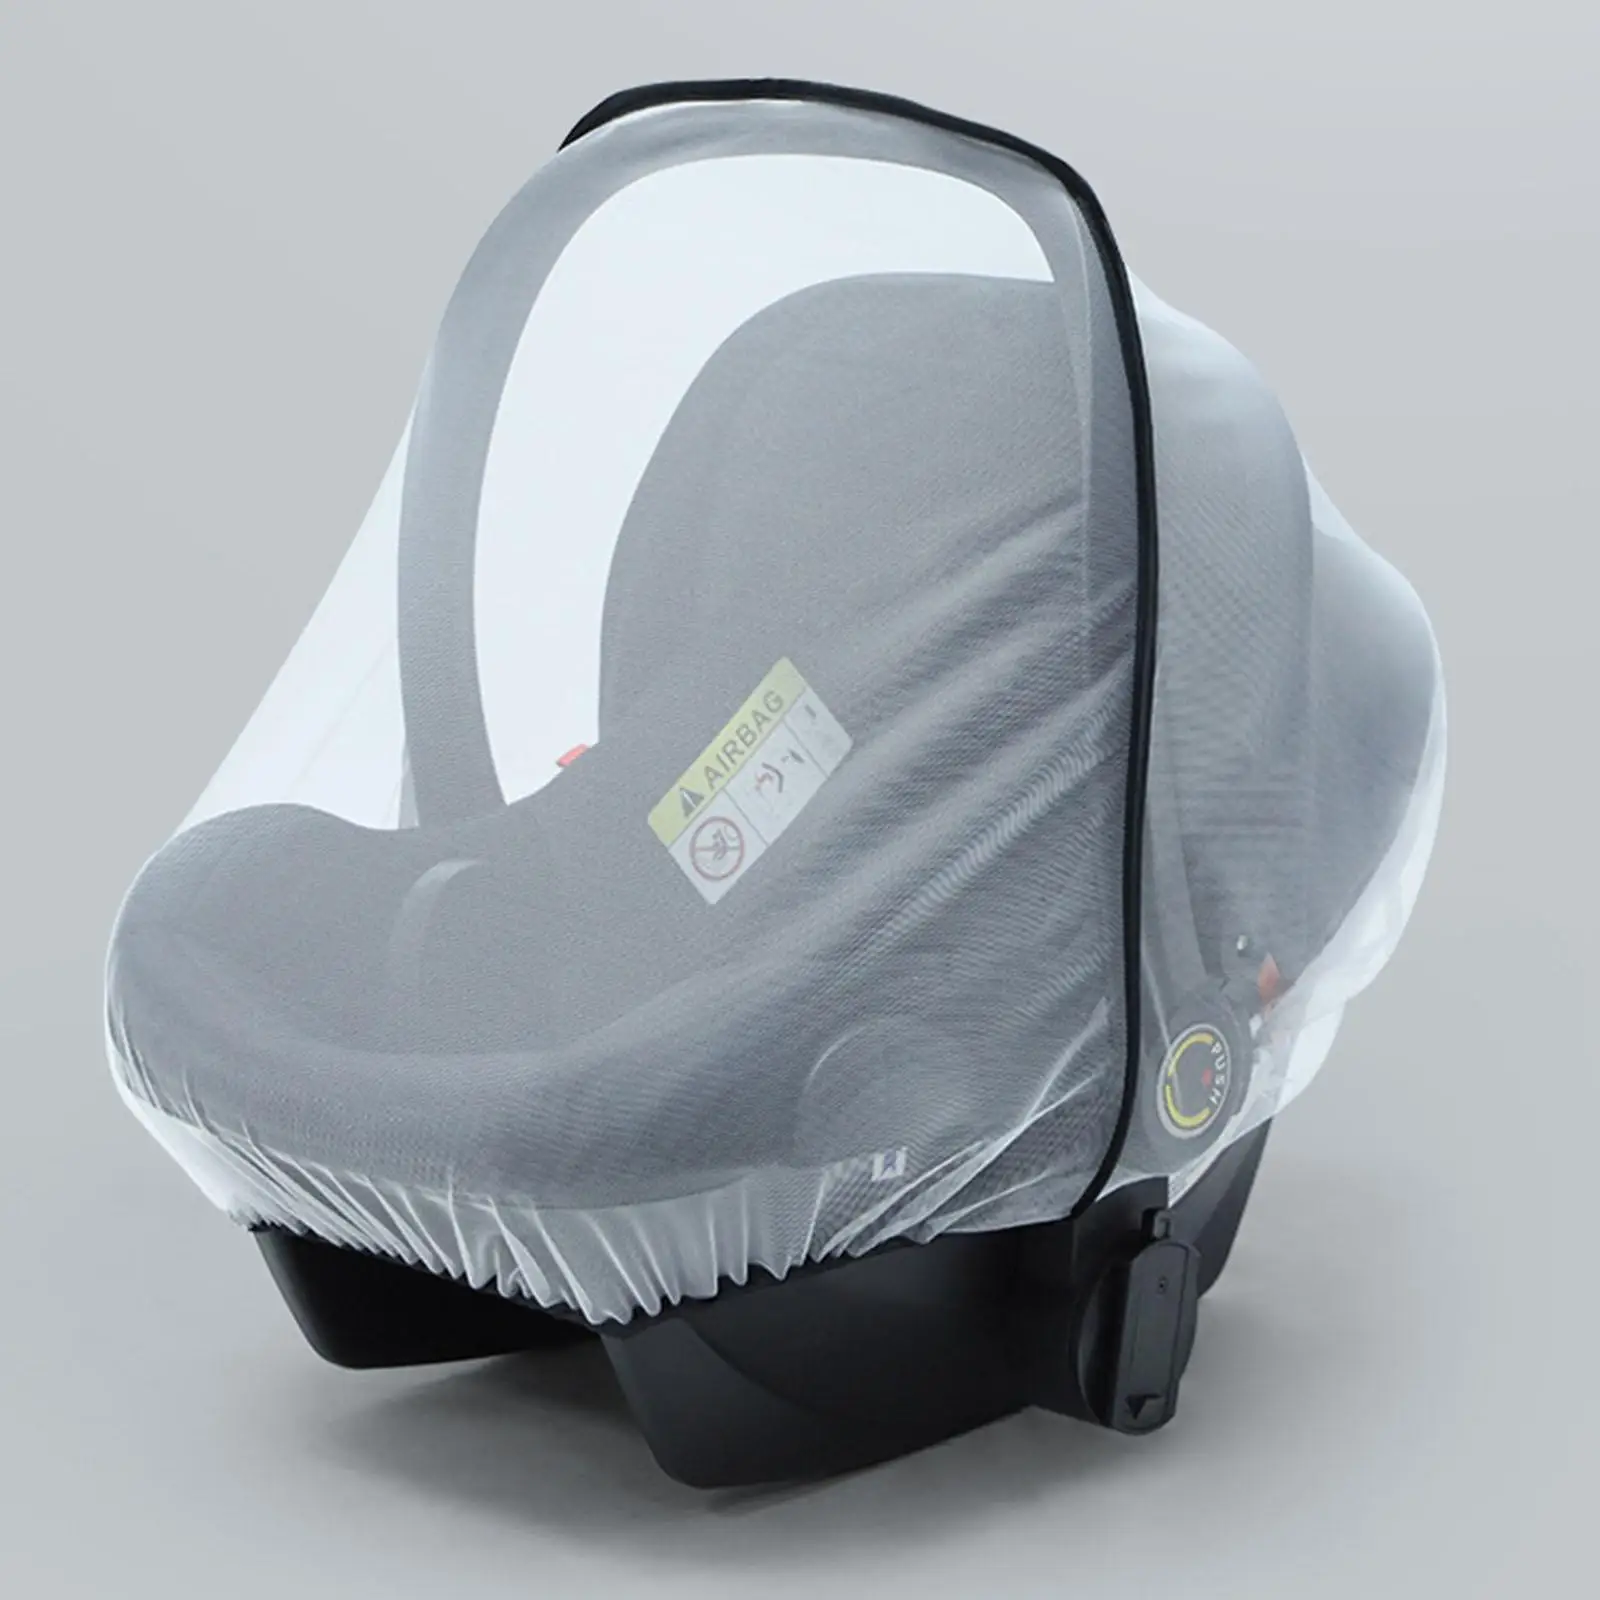 Car Seat Mesh Stroller Cradles Pushchair Durable Protection for Child Kids